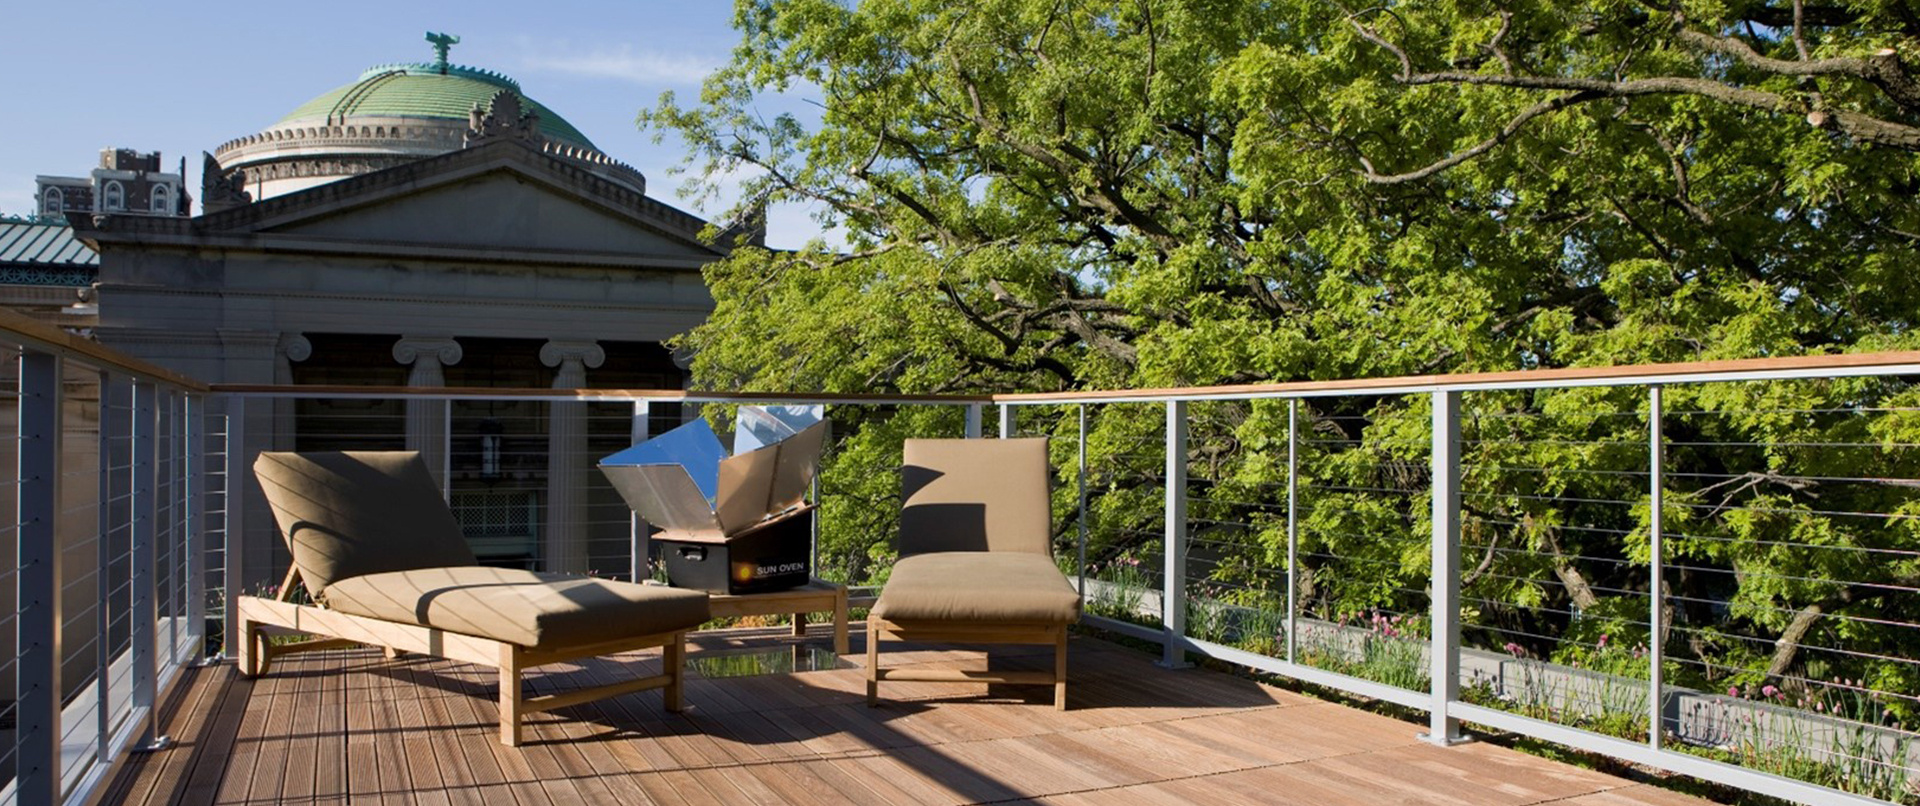 Rooftop patio decking featured image